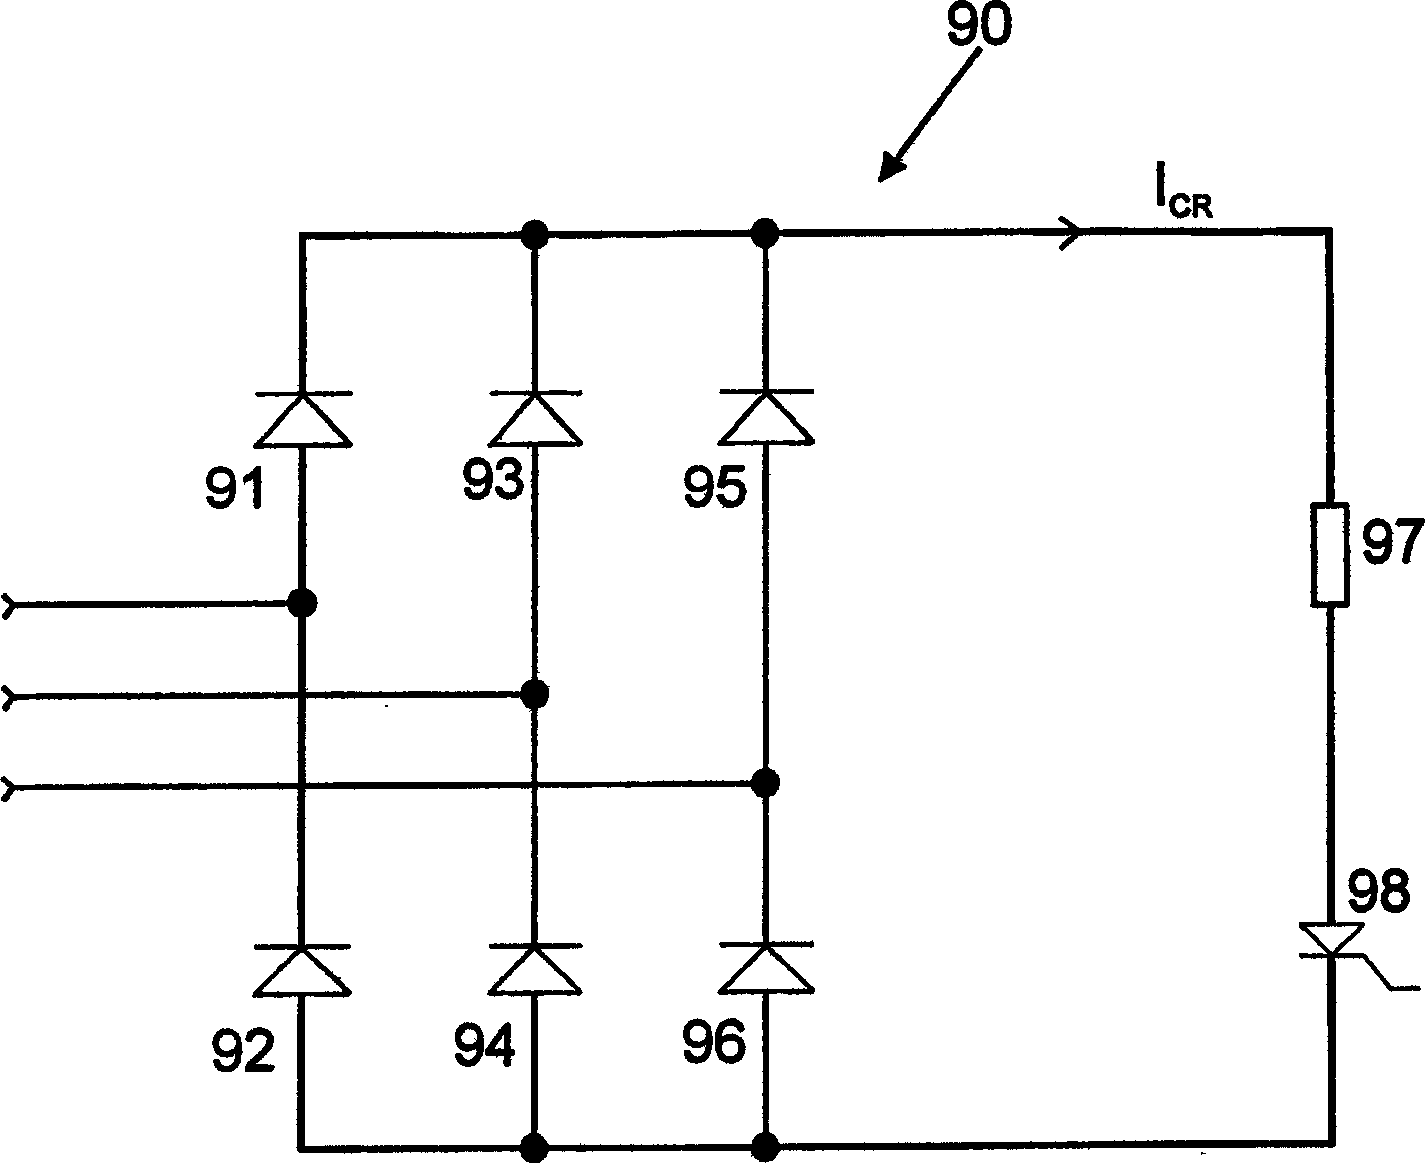 Control and protection of a doubly-fed induction generator system